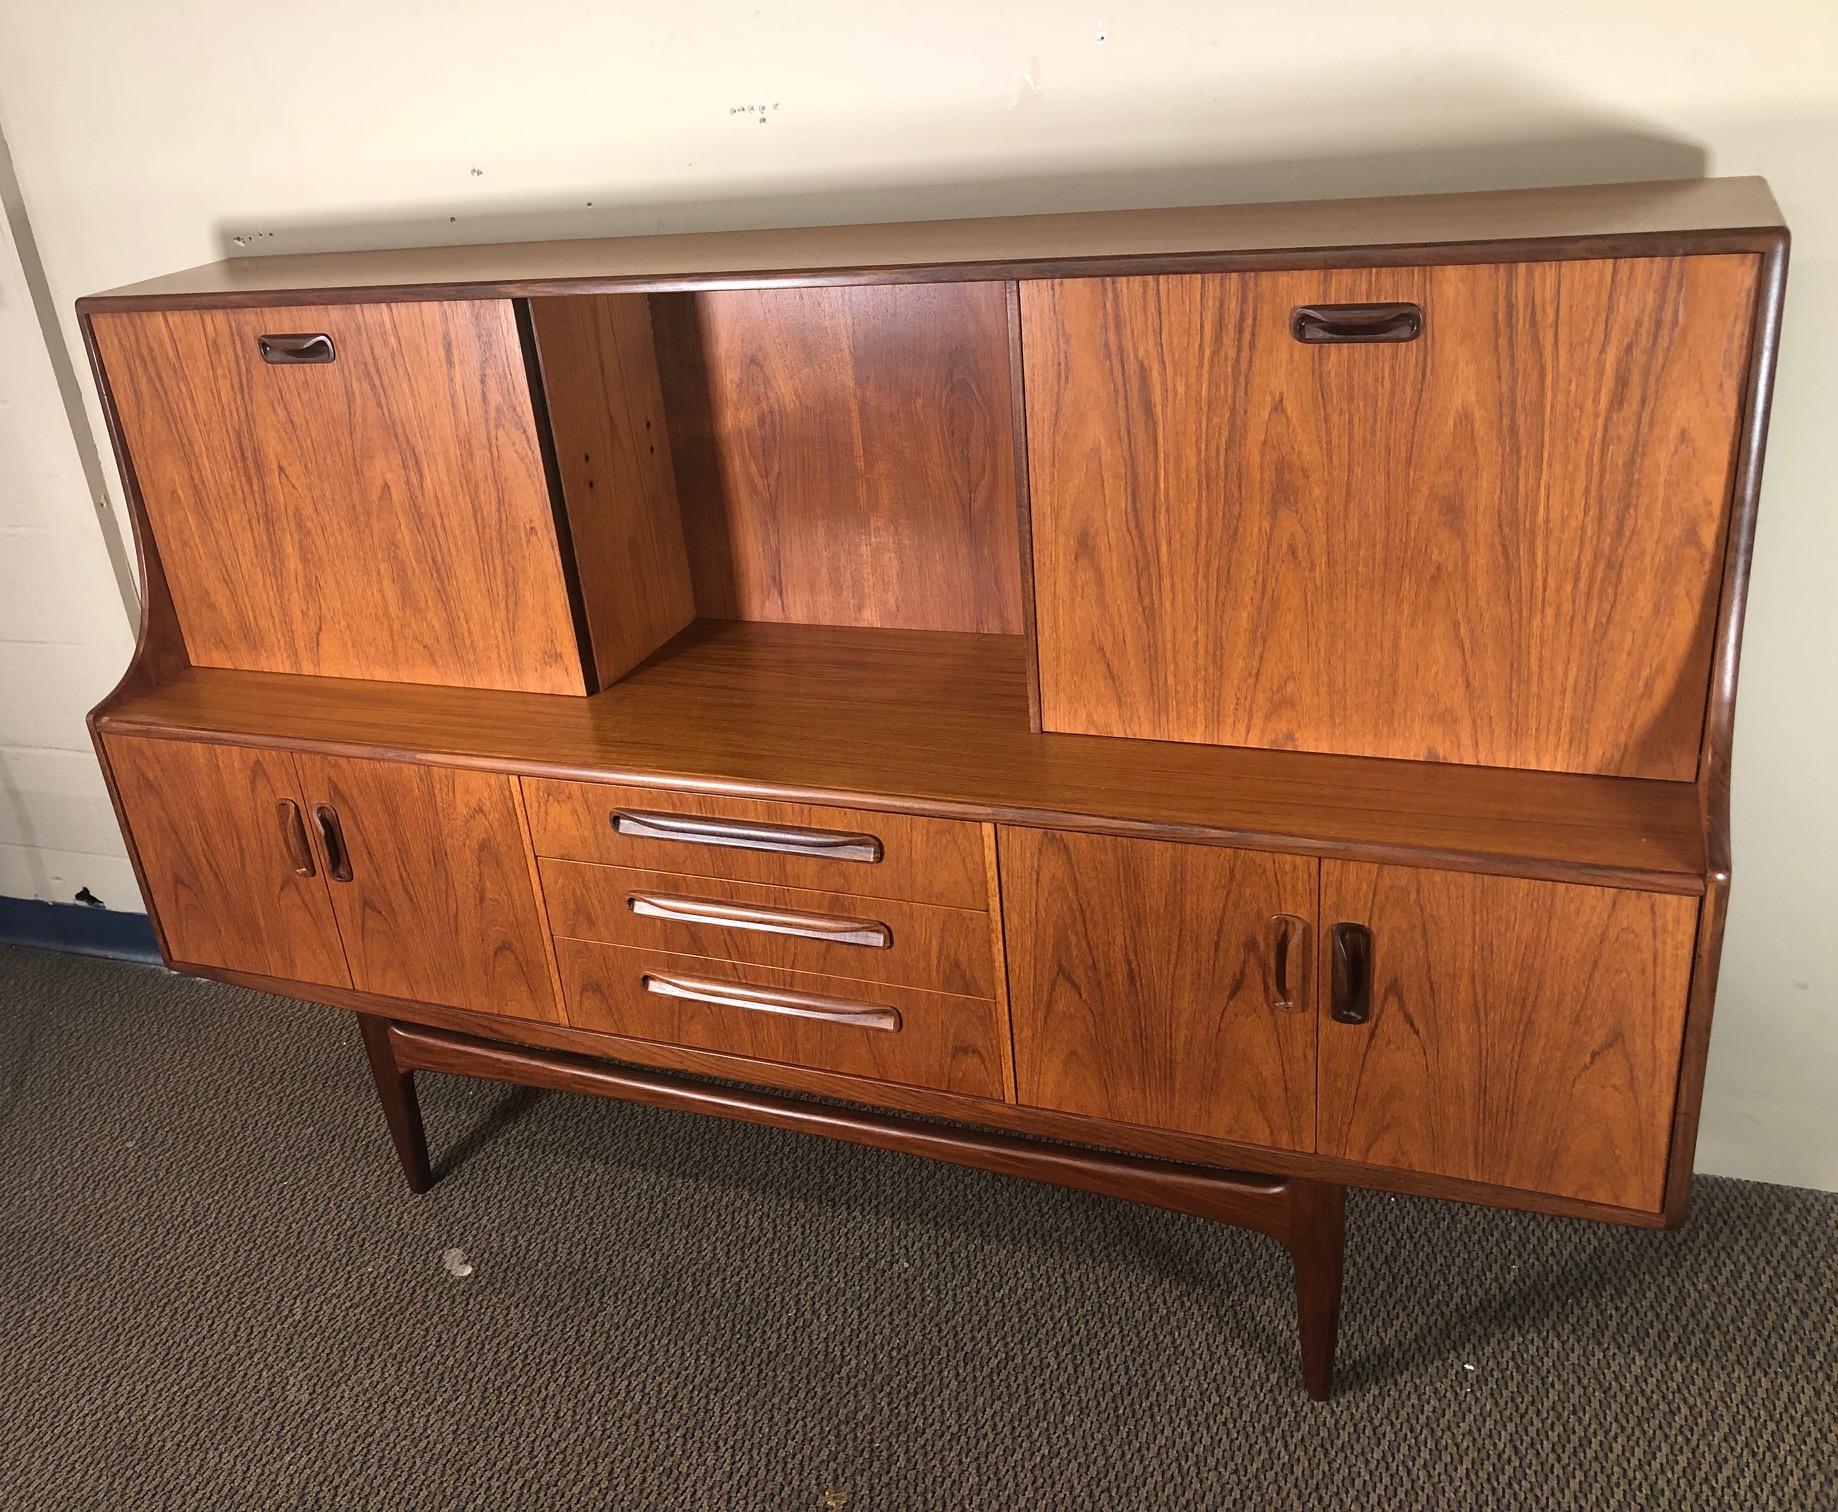 Mid-Century Modern versatile high board by G Plan. Featuring a sliding door and a small drop down desk that can comfortably hold a laptop or be used as a wine bar. 

Exceptionally nice wood grain on this piece. Very well taken care of. Small paint